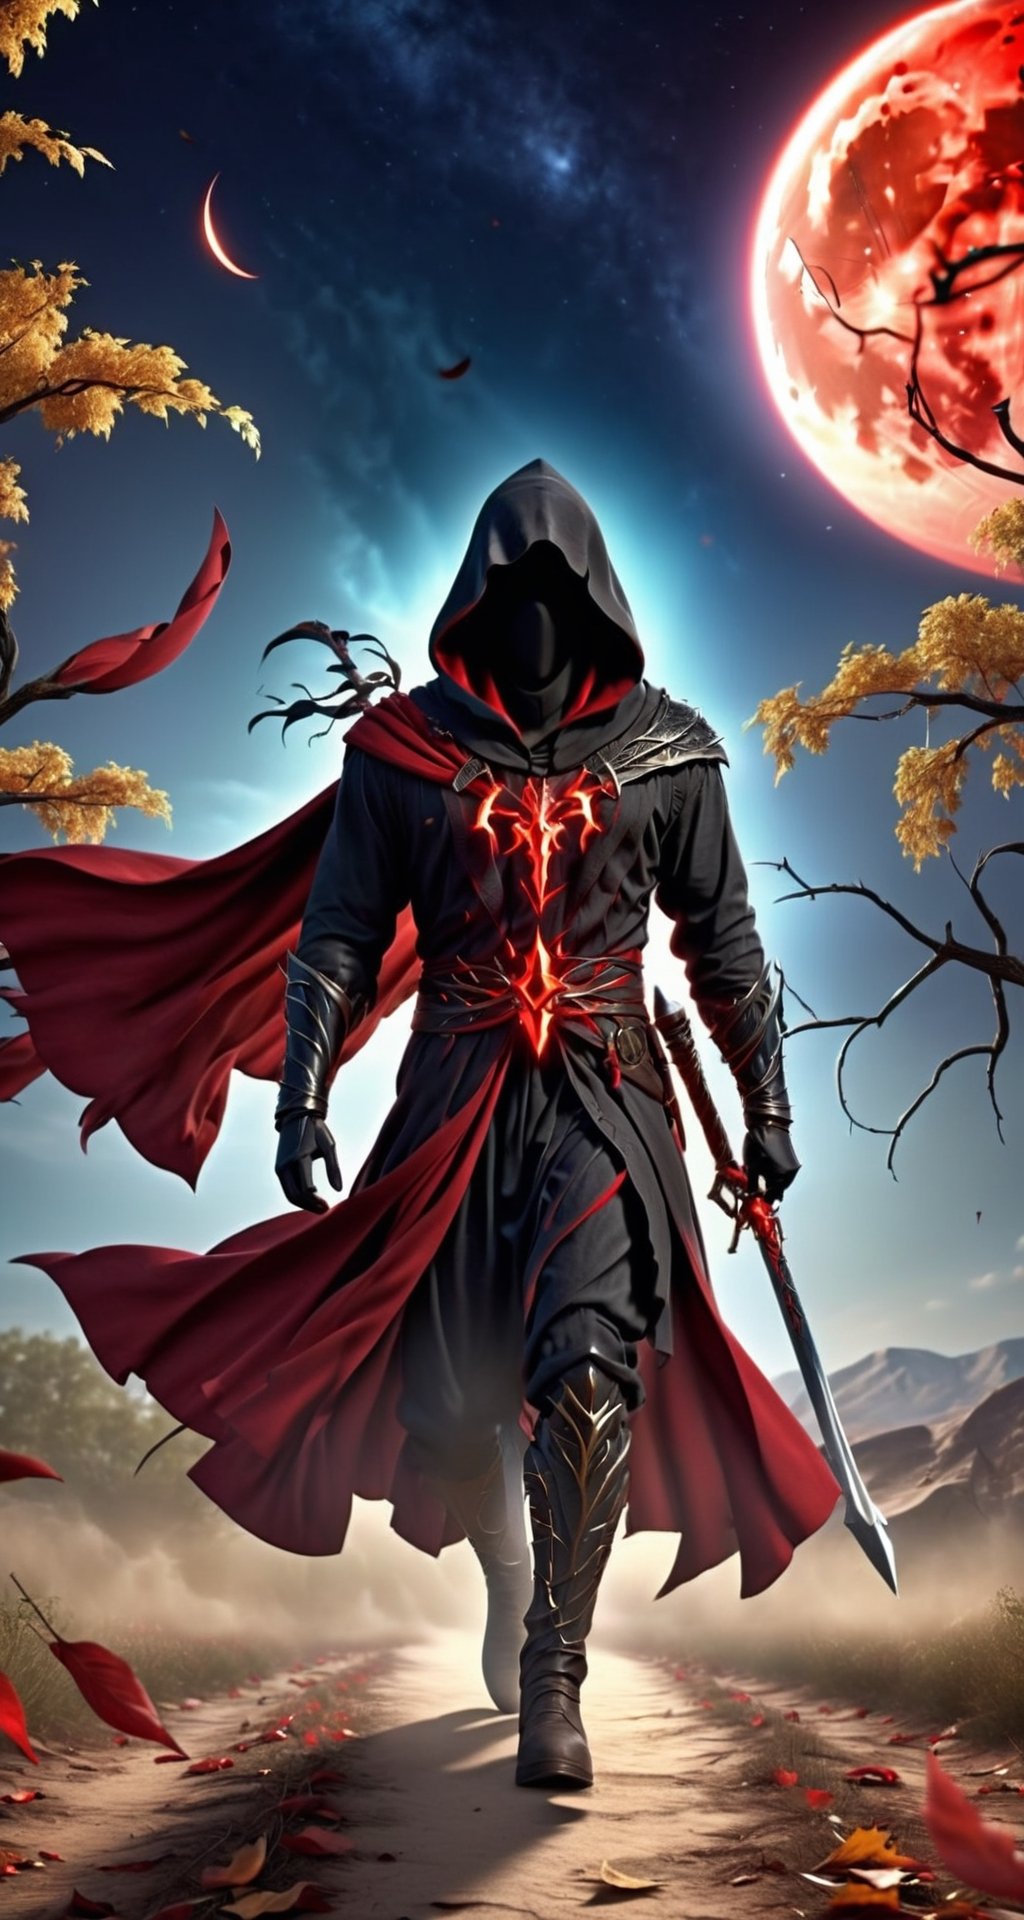 (grim reaper: 1.5), (full body), (black clothes: 1.5), (dark path: 1.3), (sickle: 1.4), (night sky: 1.2), (trees dry: 1.5), (dry leaves:1.4), (bright red moon:1.3), (falling leaves:1.5), (spectrum:1.5)
BREAK
(Realistic, Photorealistic: 1.5), (Masterpiece, Best Quality: 1.4), (Ultra High Resolution: 1.5), (RAW Photo: 1.2), (Face Focus: 1.2), (Ultra Detailed CG Unified 8k Wallpaper: 1.5), (Hyper Sharp Focus: 1.5), (Ultra Sharp Focus: 1.5), (Beautiful pretty face: 1.5), (professional photo lighting:1.3), , (super detailed background, detail background: 1.5), (elegant:1.3), (kinematic:1.4),realhands,YAMATO,more detail XL,3d style,DonMn1ghtm4reXL